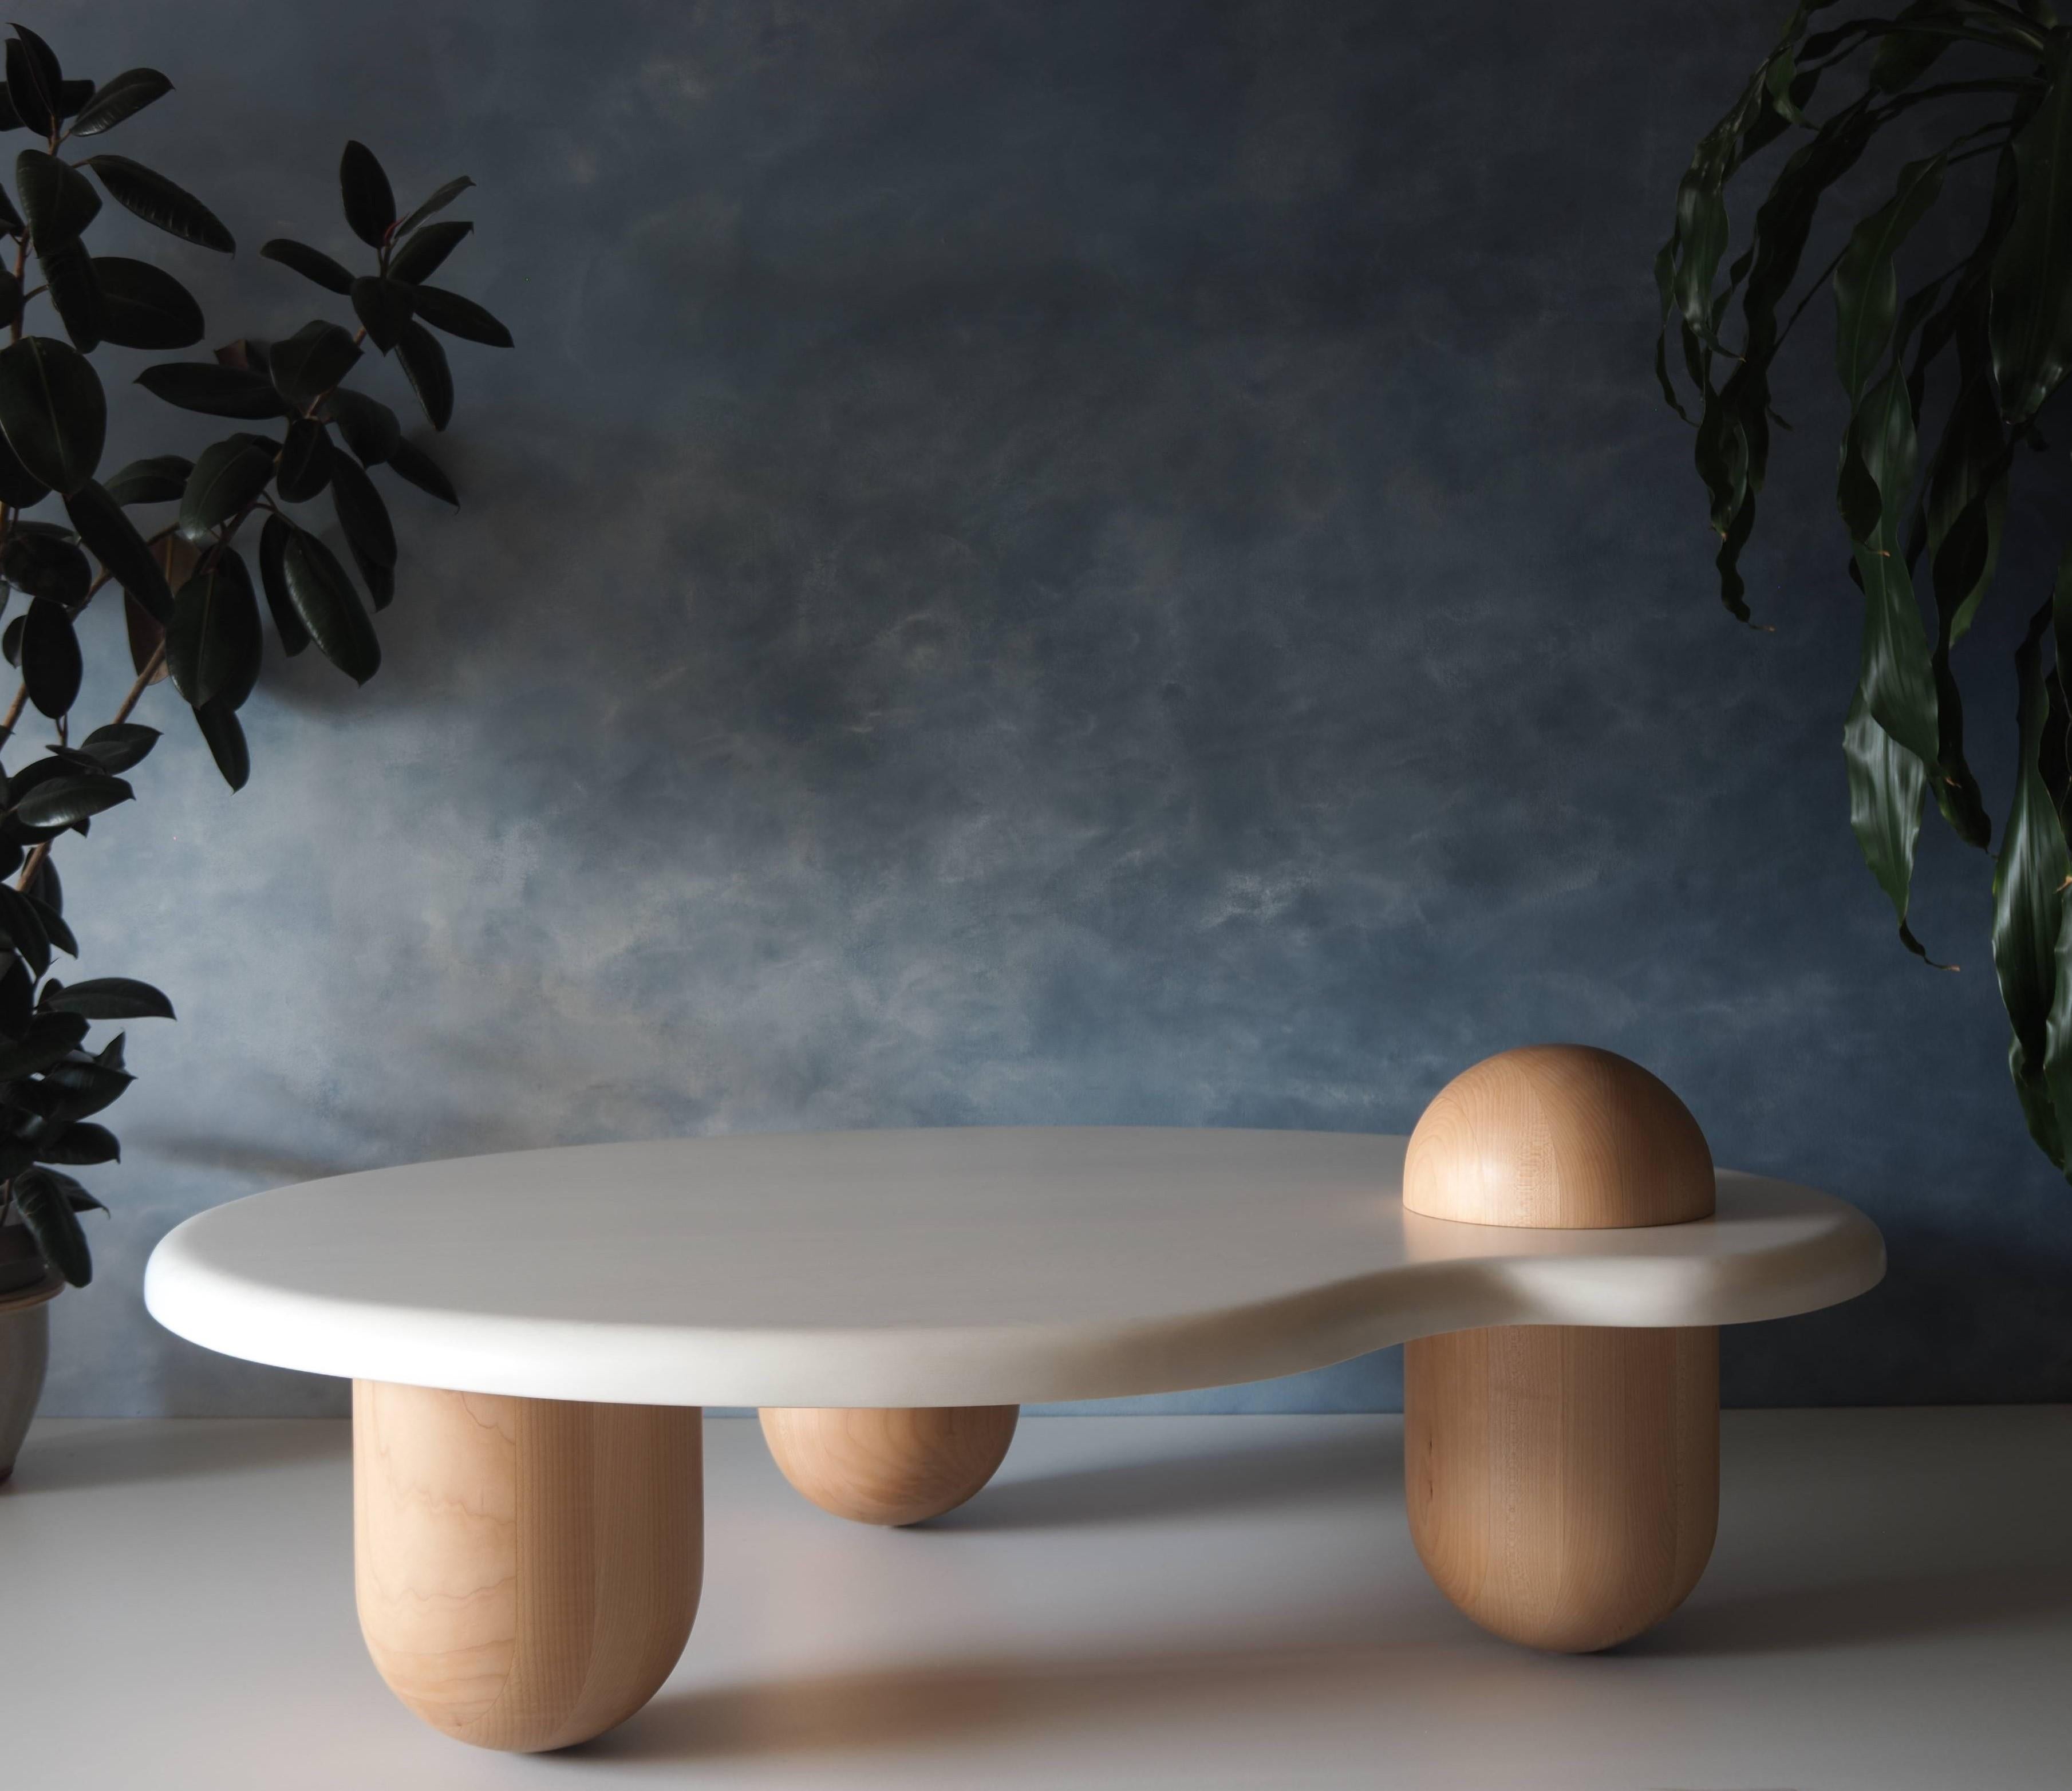 Our Palette coffee table was not designed to be used as a palette but feel free to use as you wish. The Solid maple legs are hand turned in our studio in Vancouver. The table tops whitewashed finish allows you to see the polished wood grain through